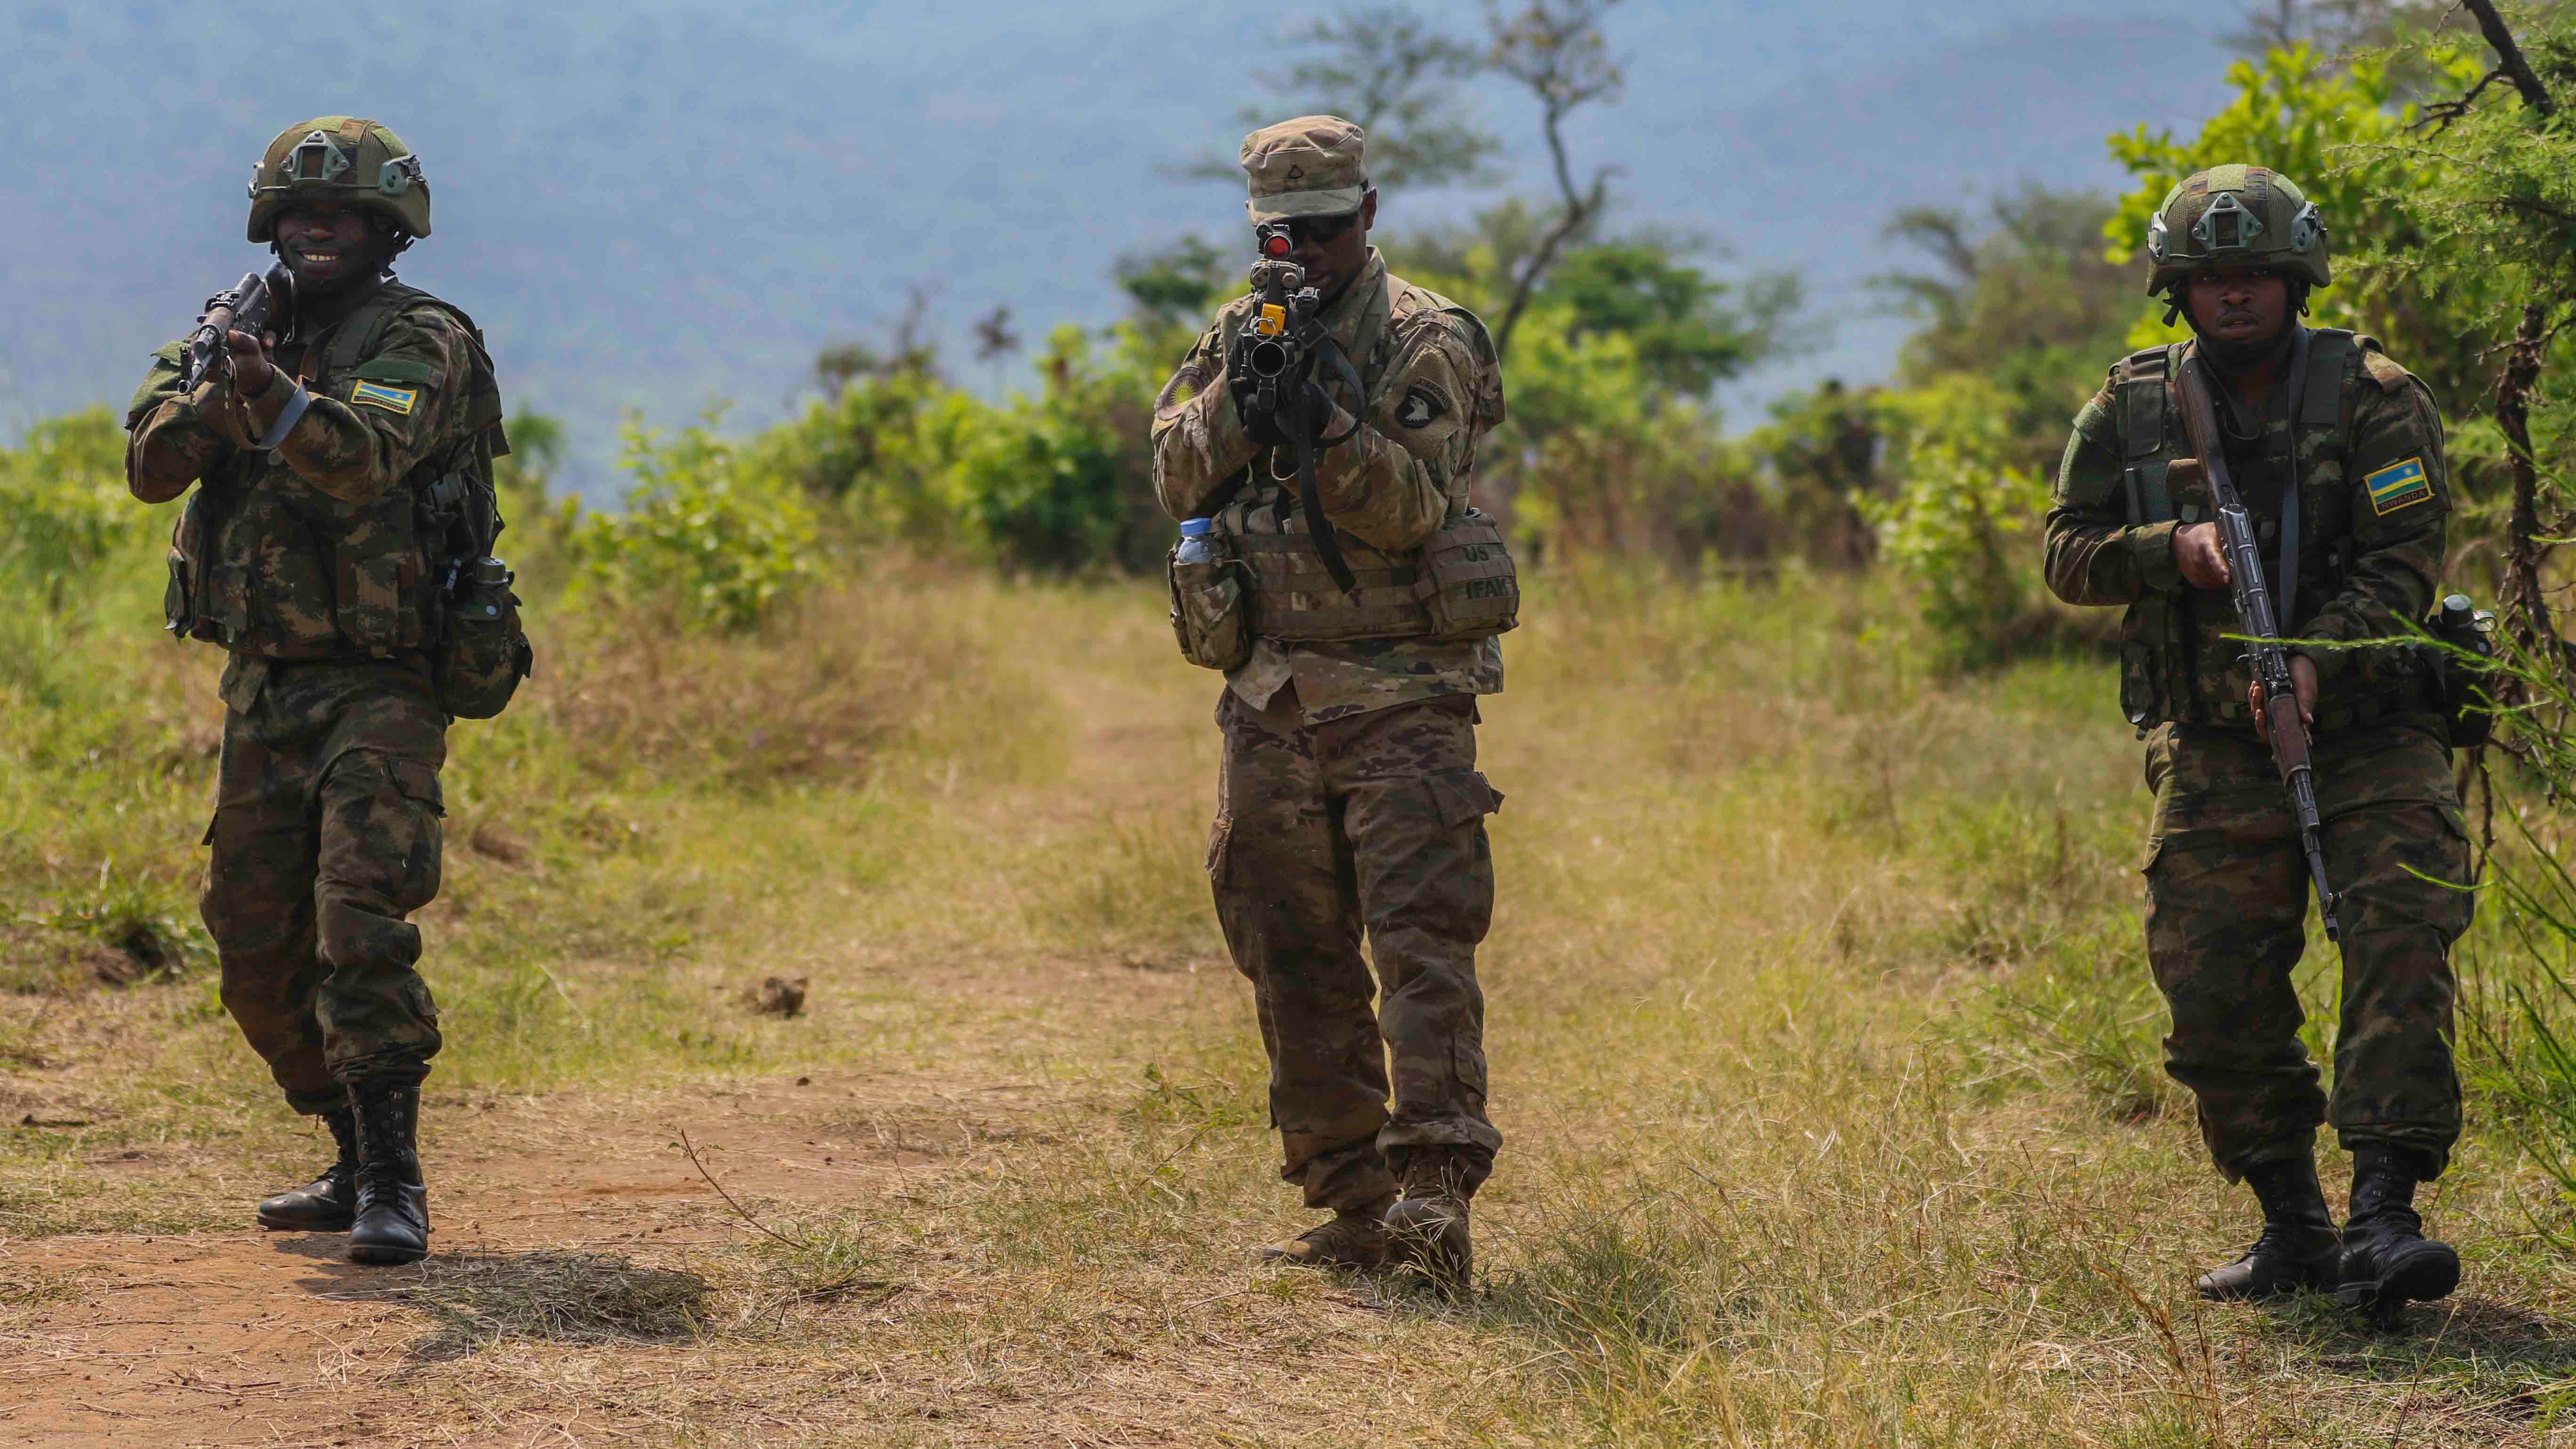 US soldiers train with Rwandan soldiers